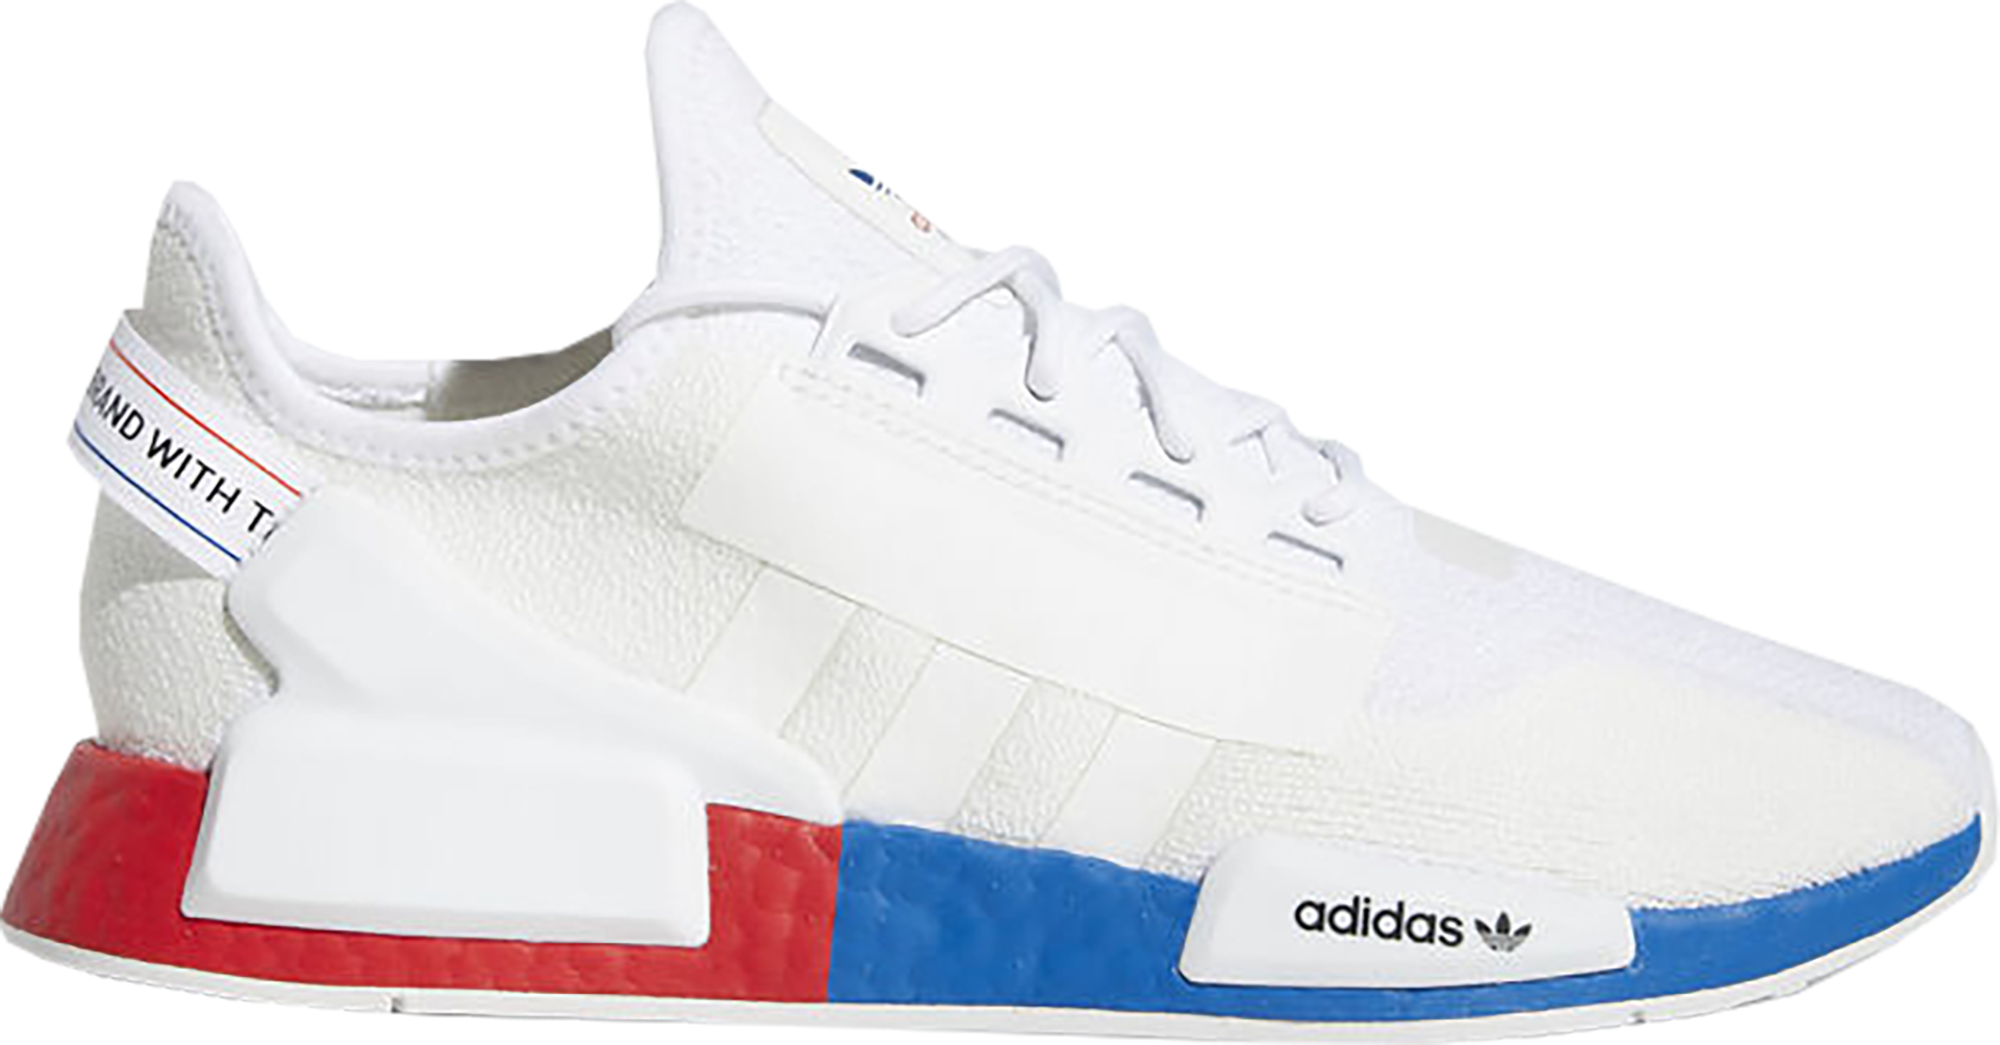 adidas NMD R1 White Red Blue - FX4148